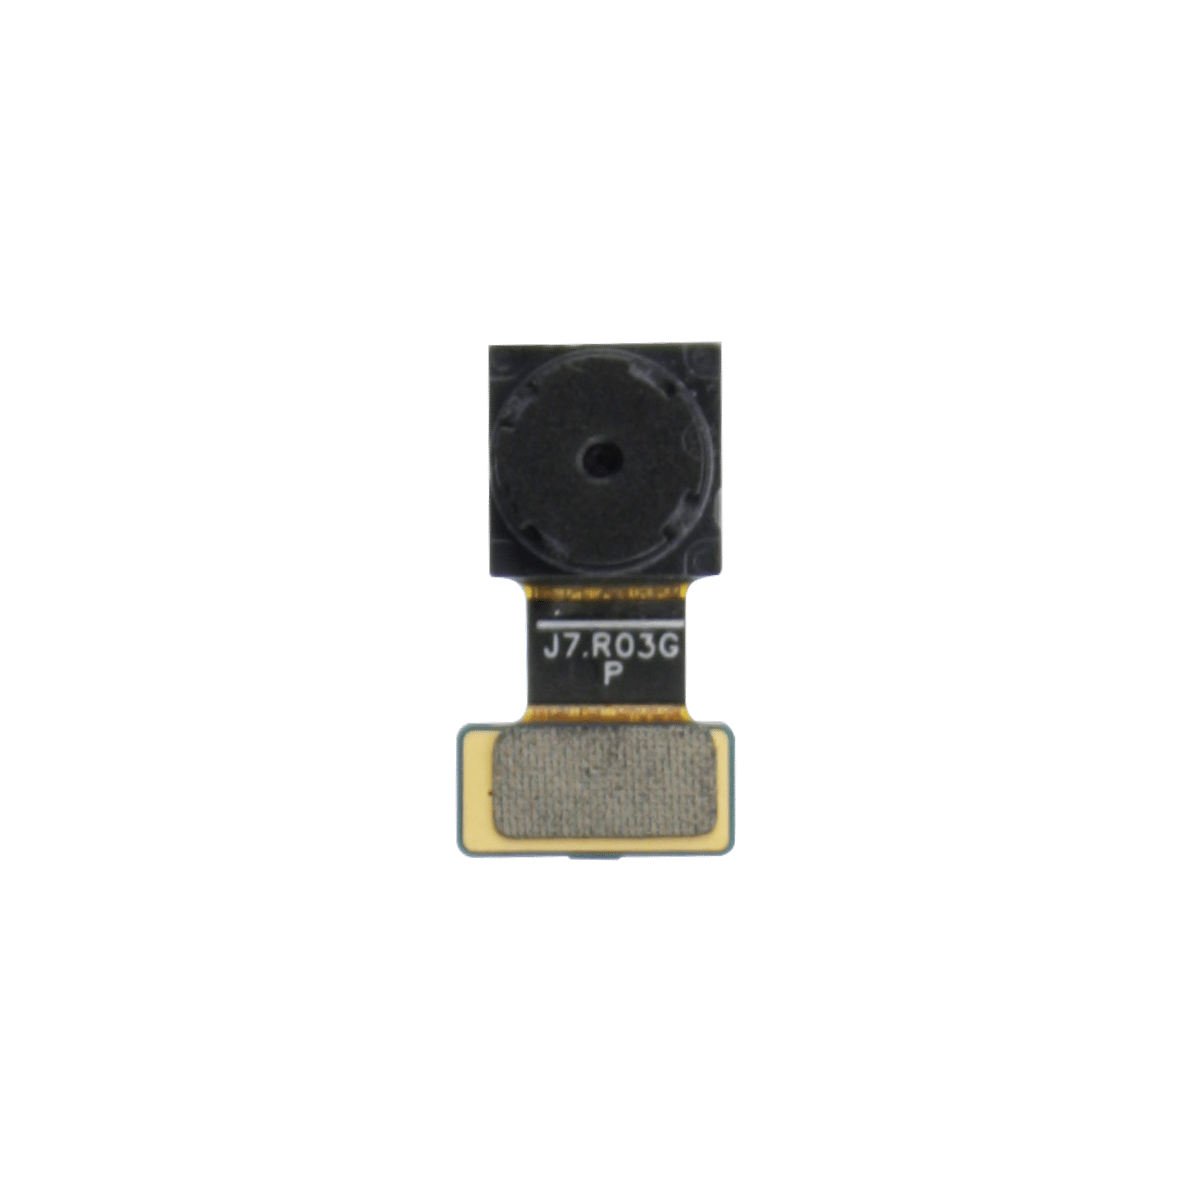 Samsung Galaxy J7 2015 Front Camera Replacement